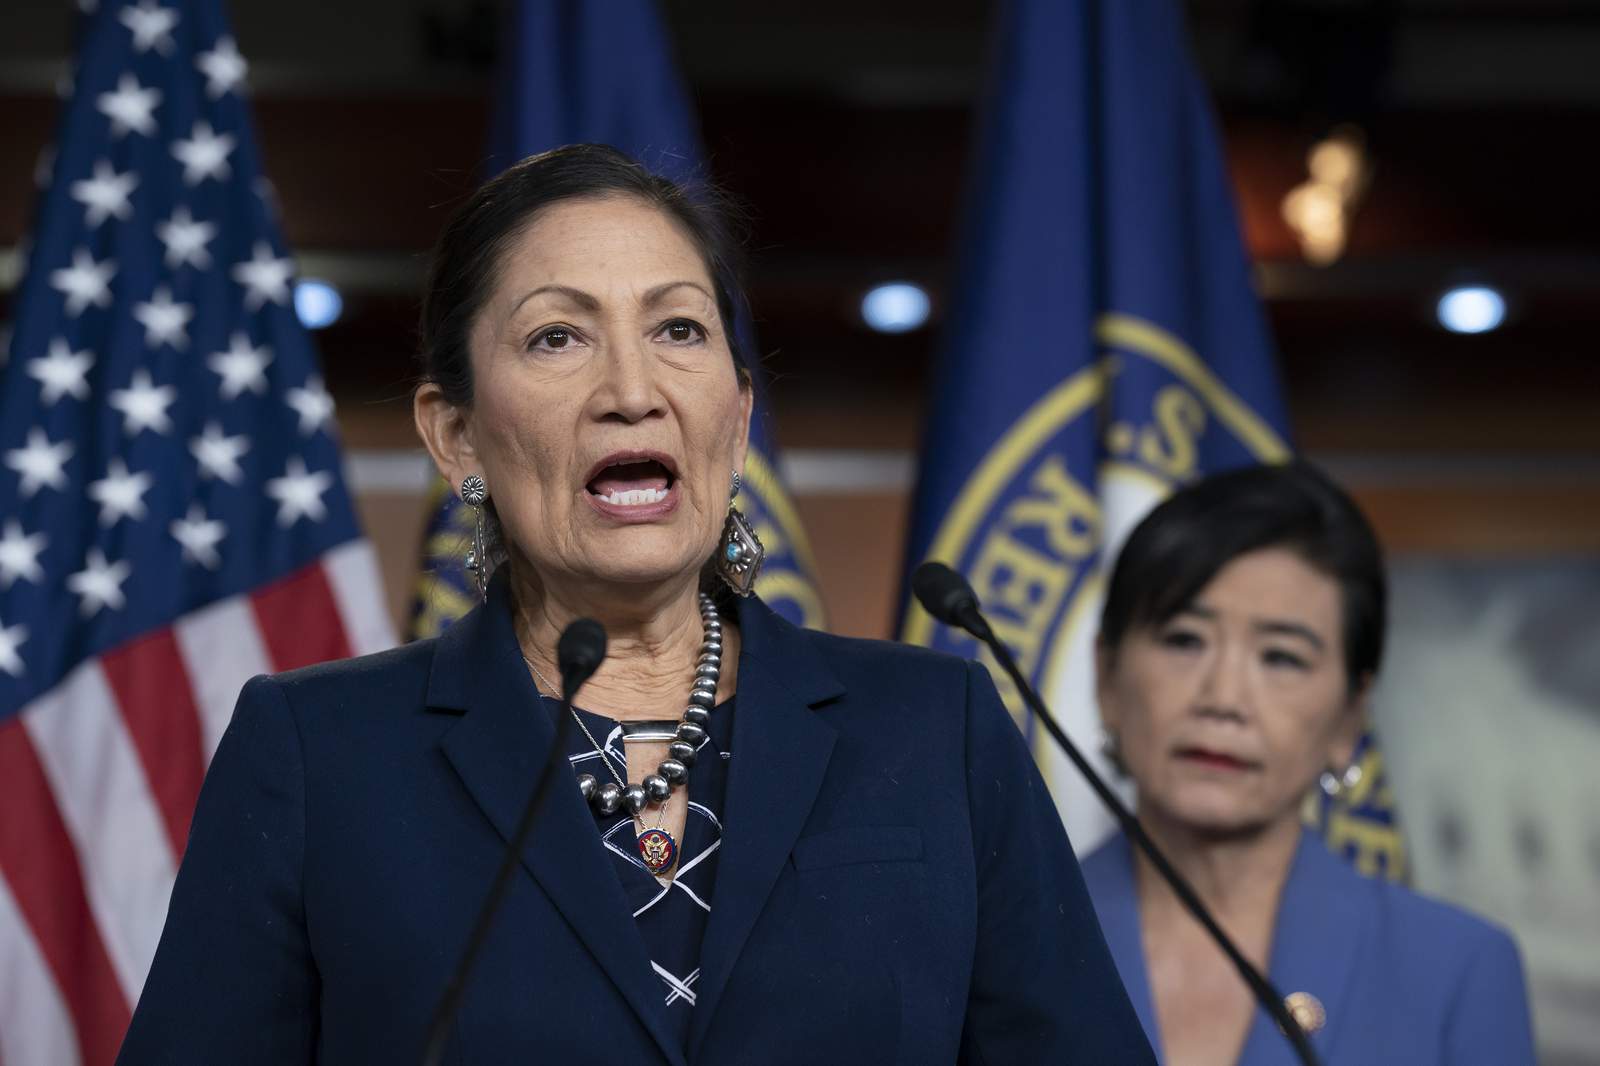 Interior nominee Haaland vows 'balance' on energy, climate